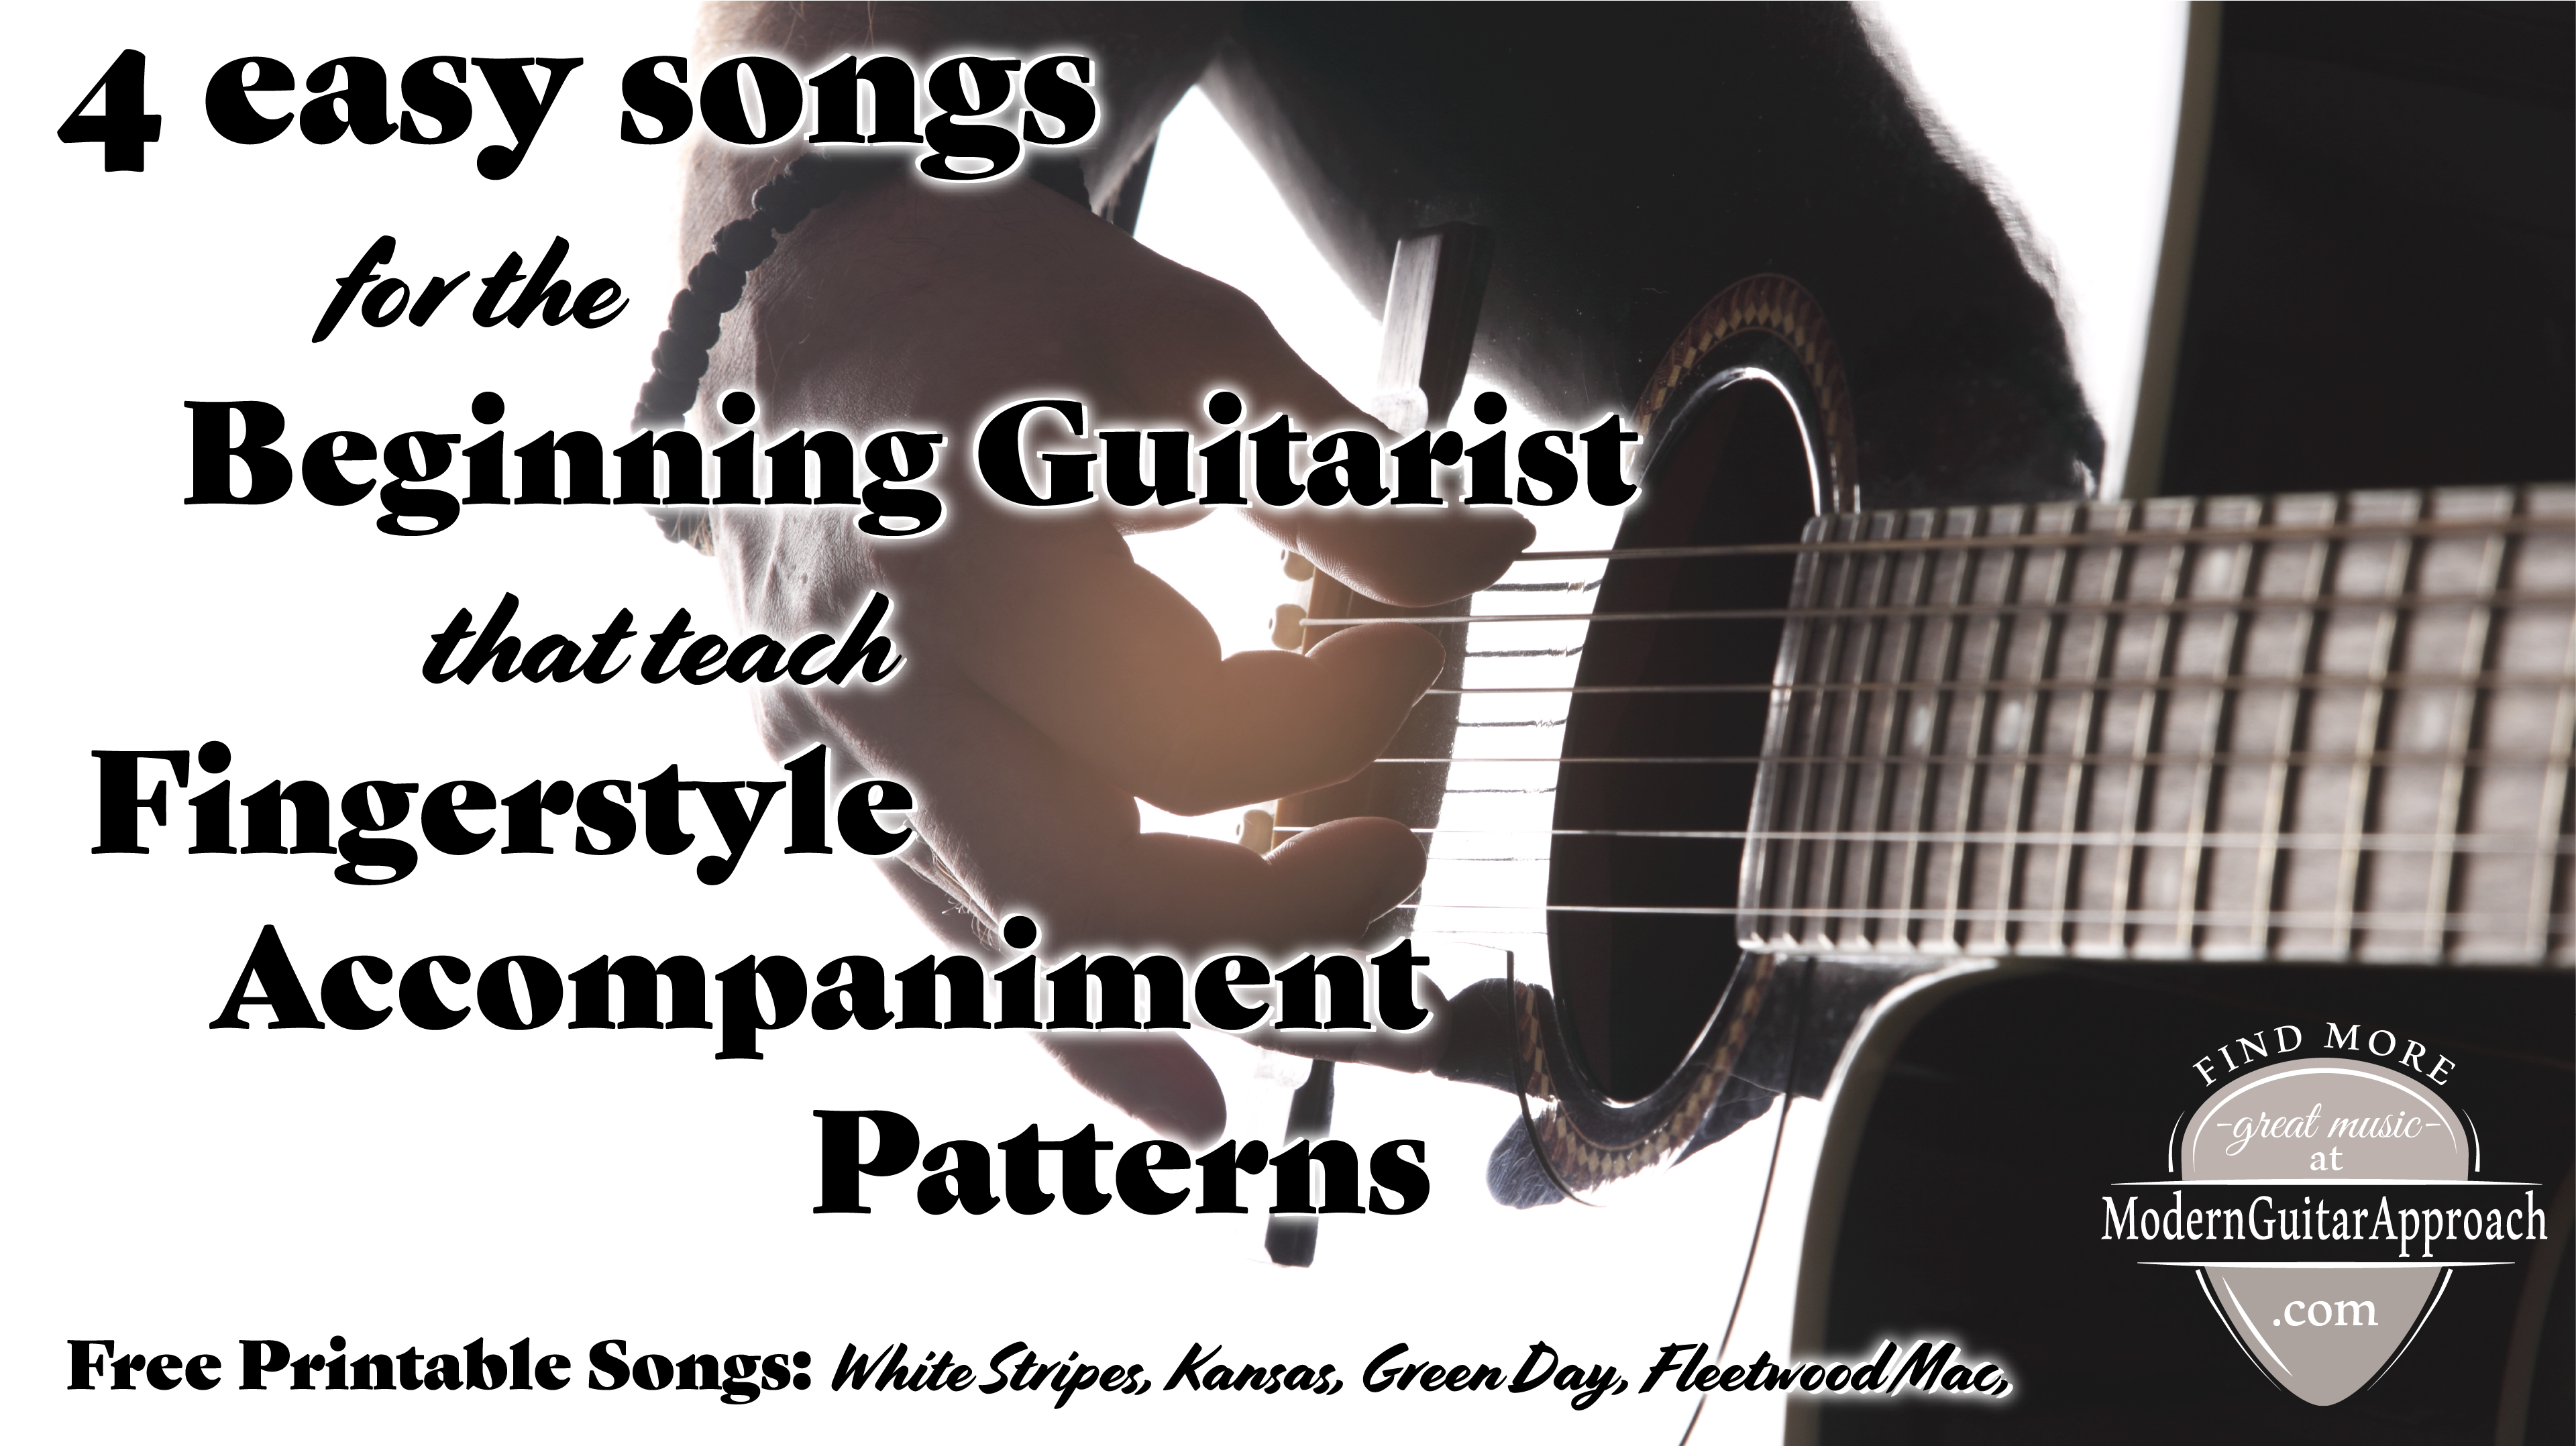 “Easy Songs for the Beginning Guitarist to Learn Fingerstyle Accompaniment on the Guitar”.  ModernGuitarApproach.com is created by a professional guitarist and guitar teacher.  It is a free resource for other teachers, guitar players, and students. Modern Guitar Approach is full of guitar lessons, tutorials, free printable songs, beginning and intermediate guitar lessons, guitar songs, tablature, sheet music, and chord charts.
